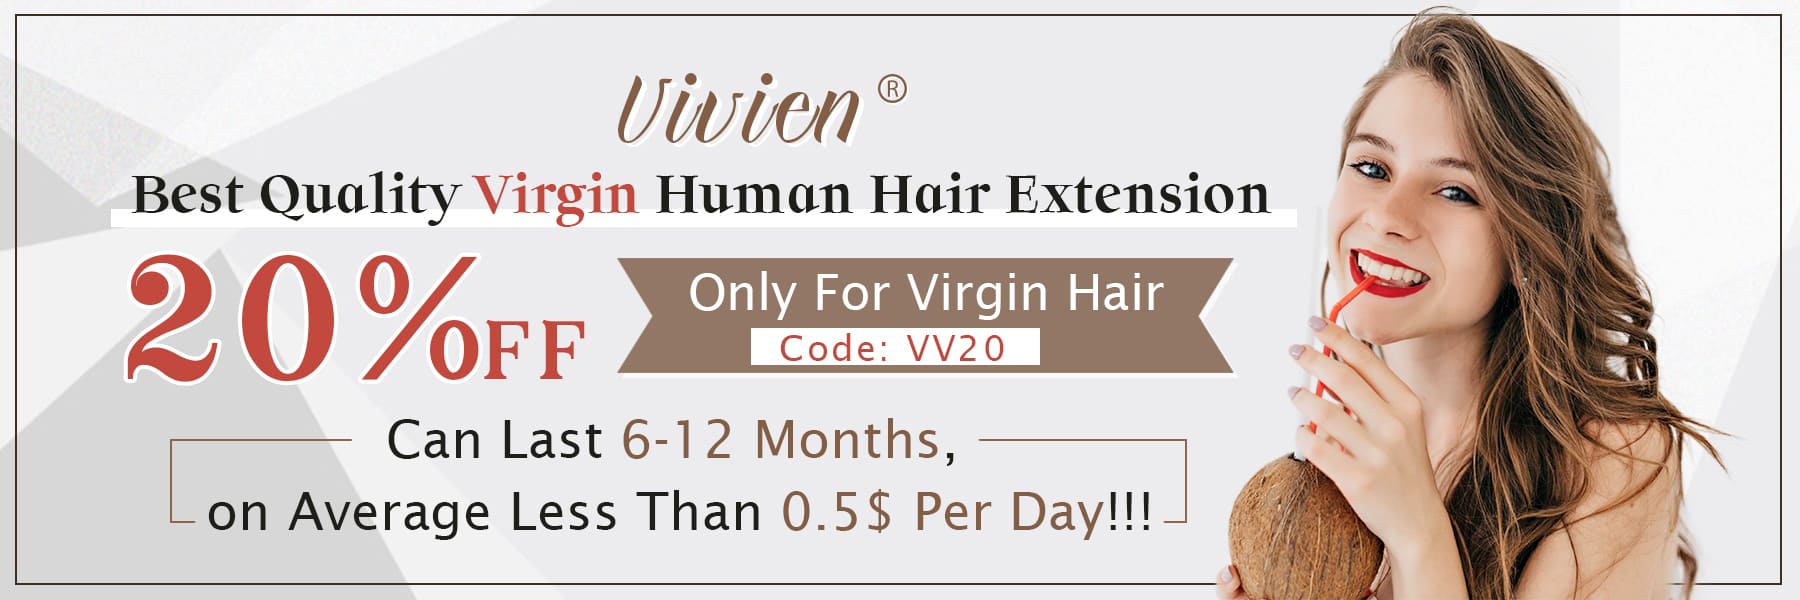 vivien virgin human hair extension can be last for a long time